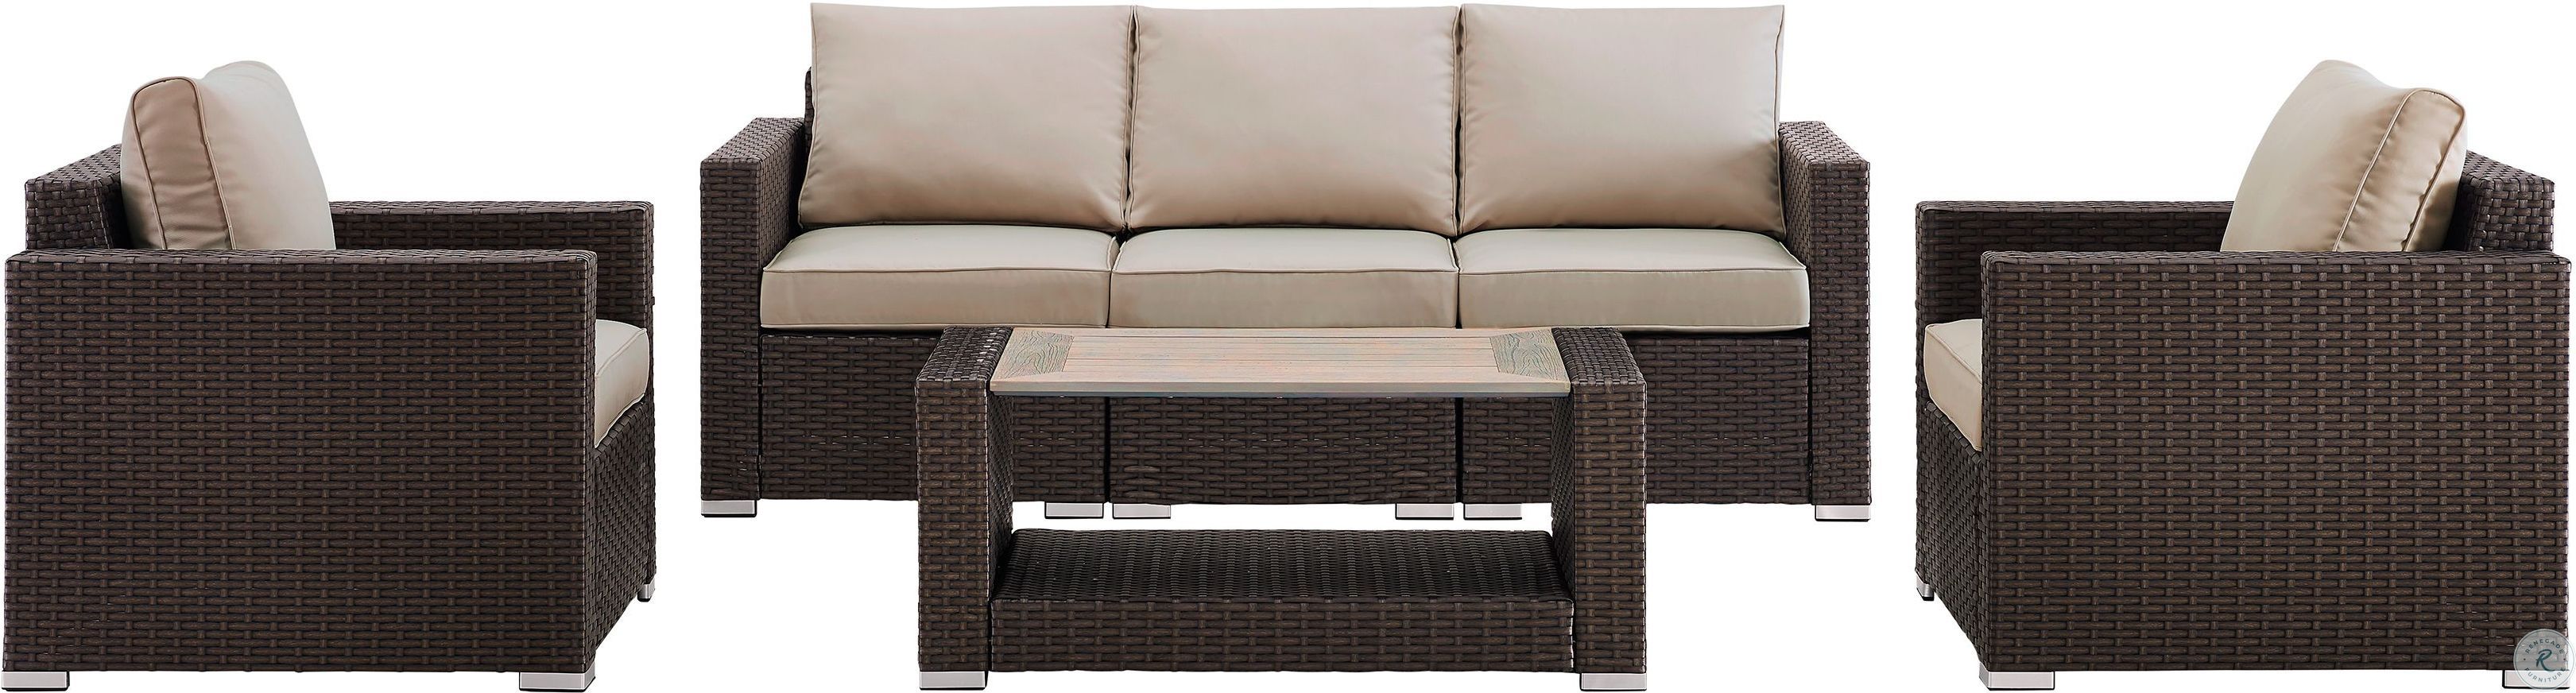 Modern Woven Rustic Brown And Beige Upholstered Outdoor Conversation Set